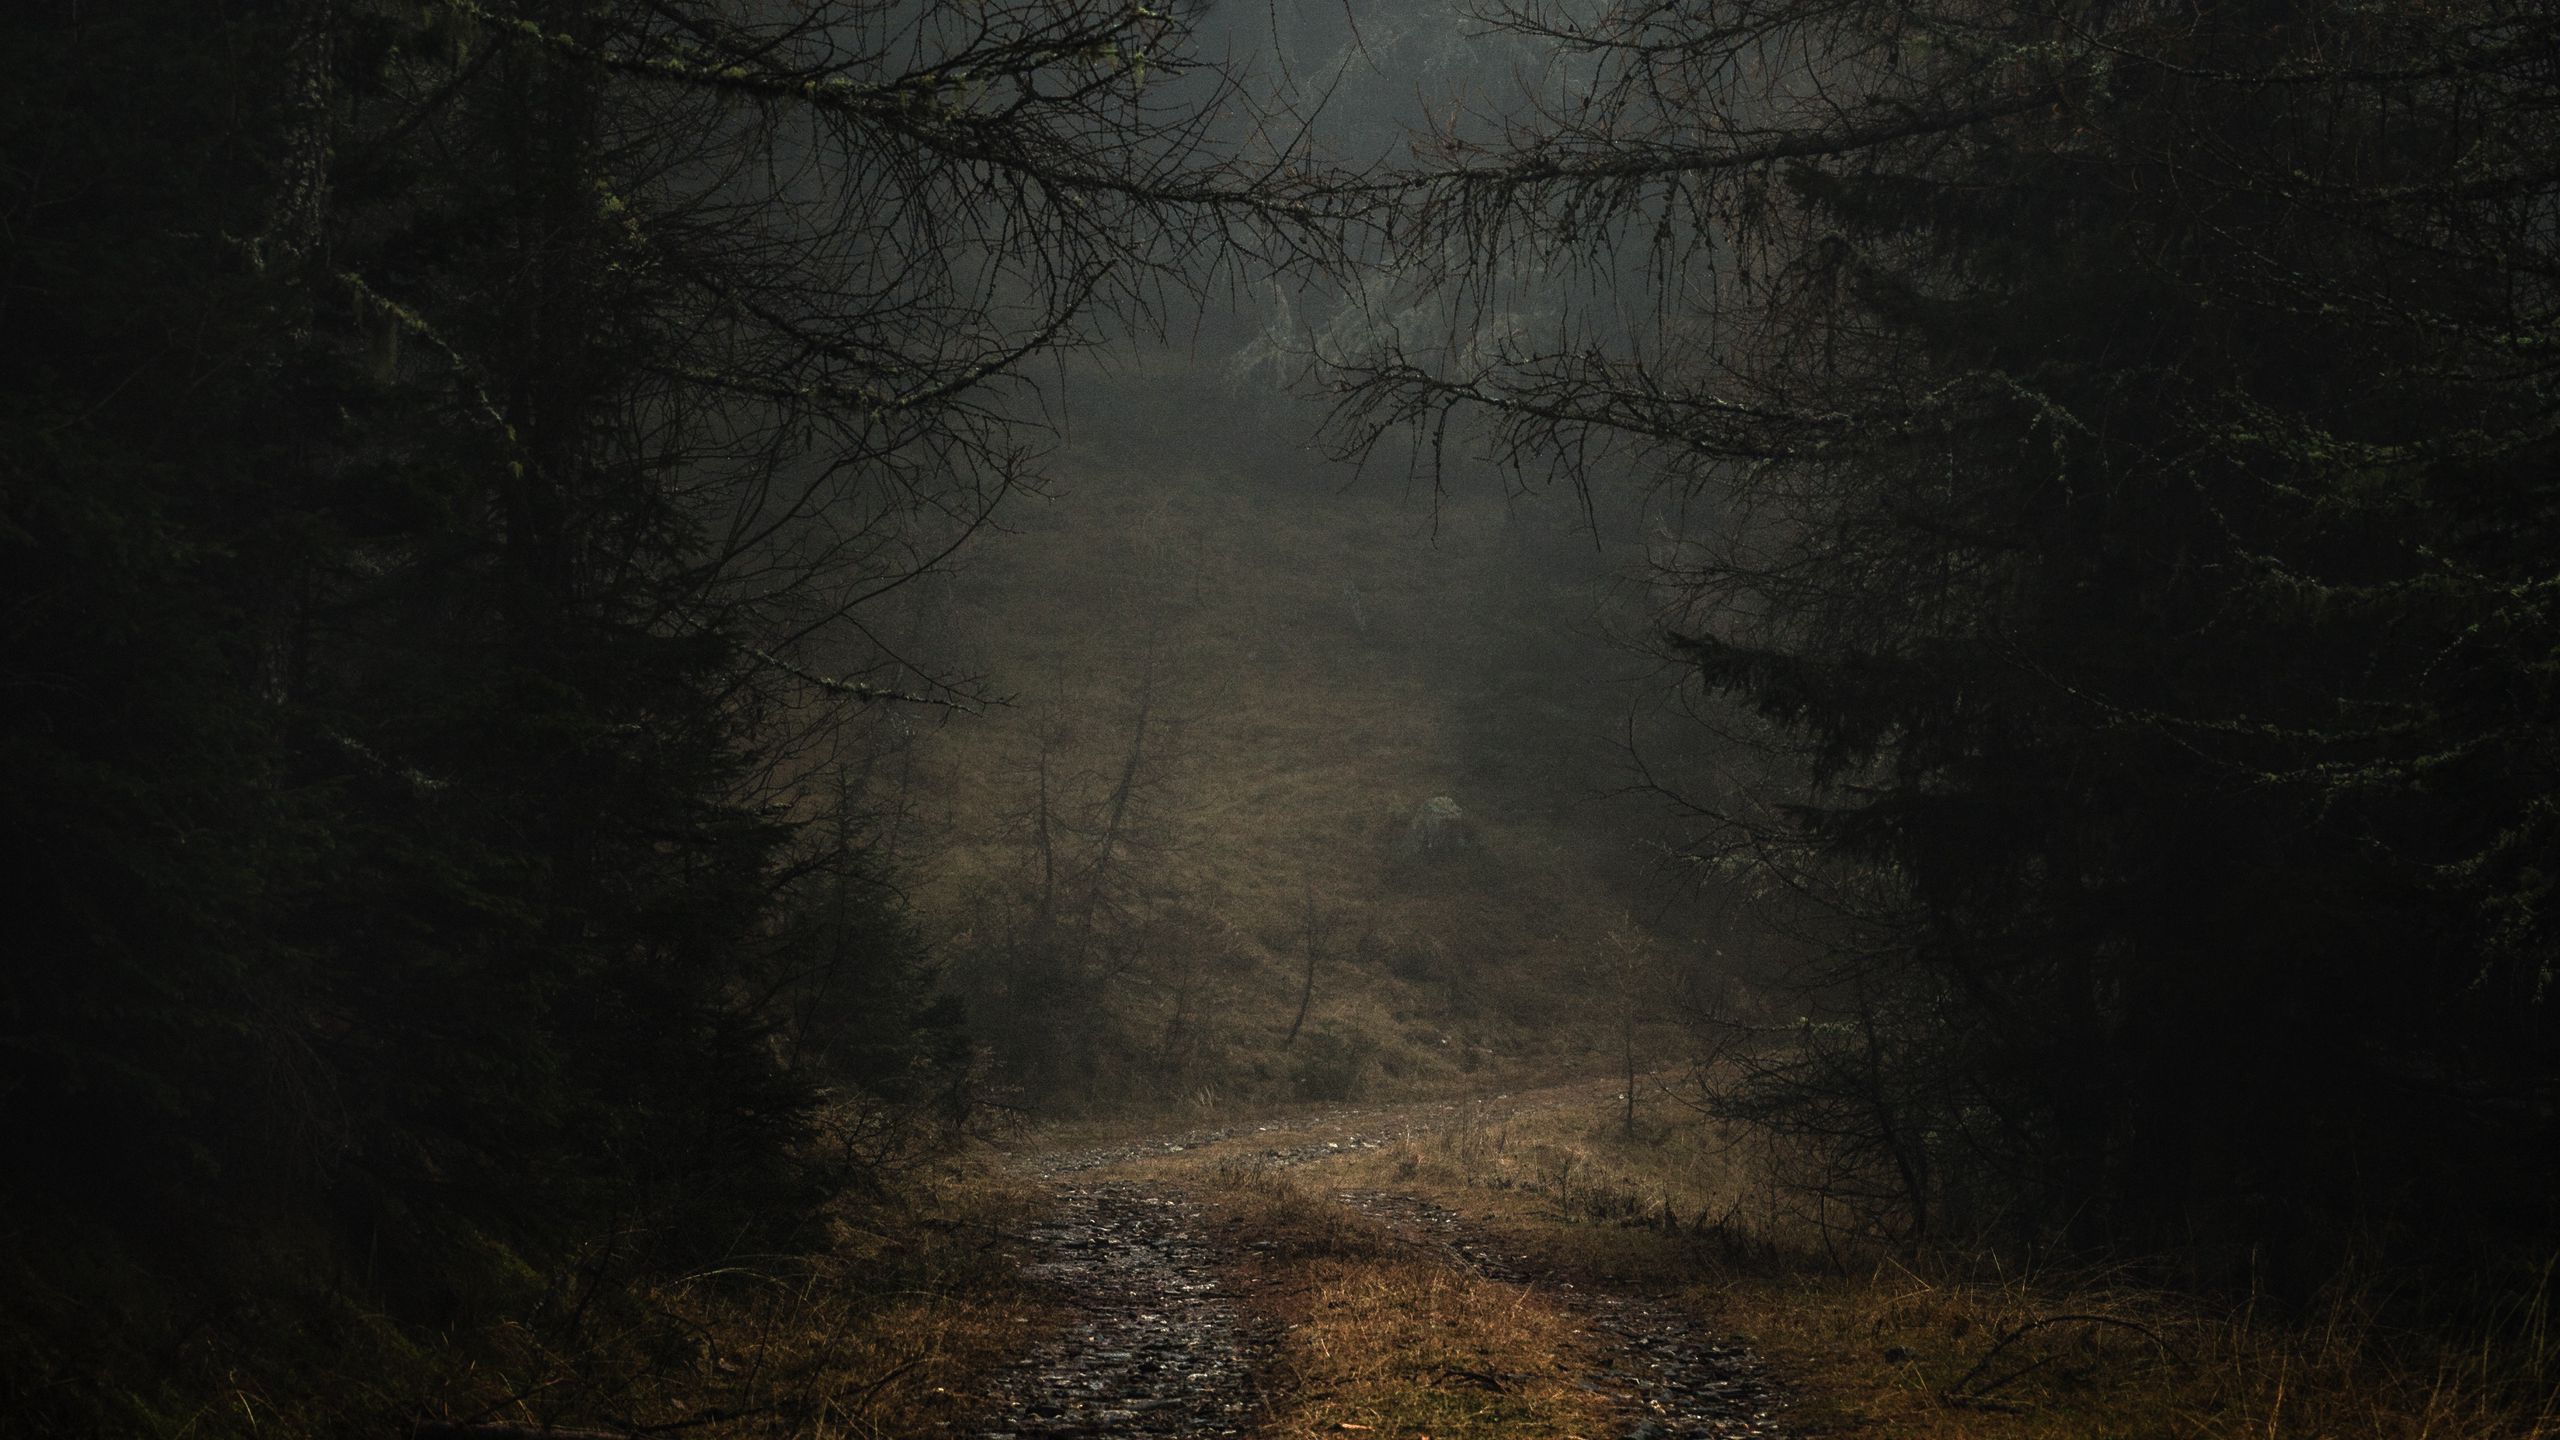 Download wallpaper 2560x1440 fog, path, branches, forest, trees, autumn